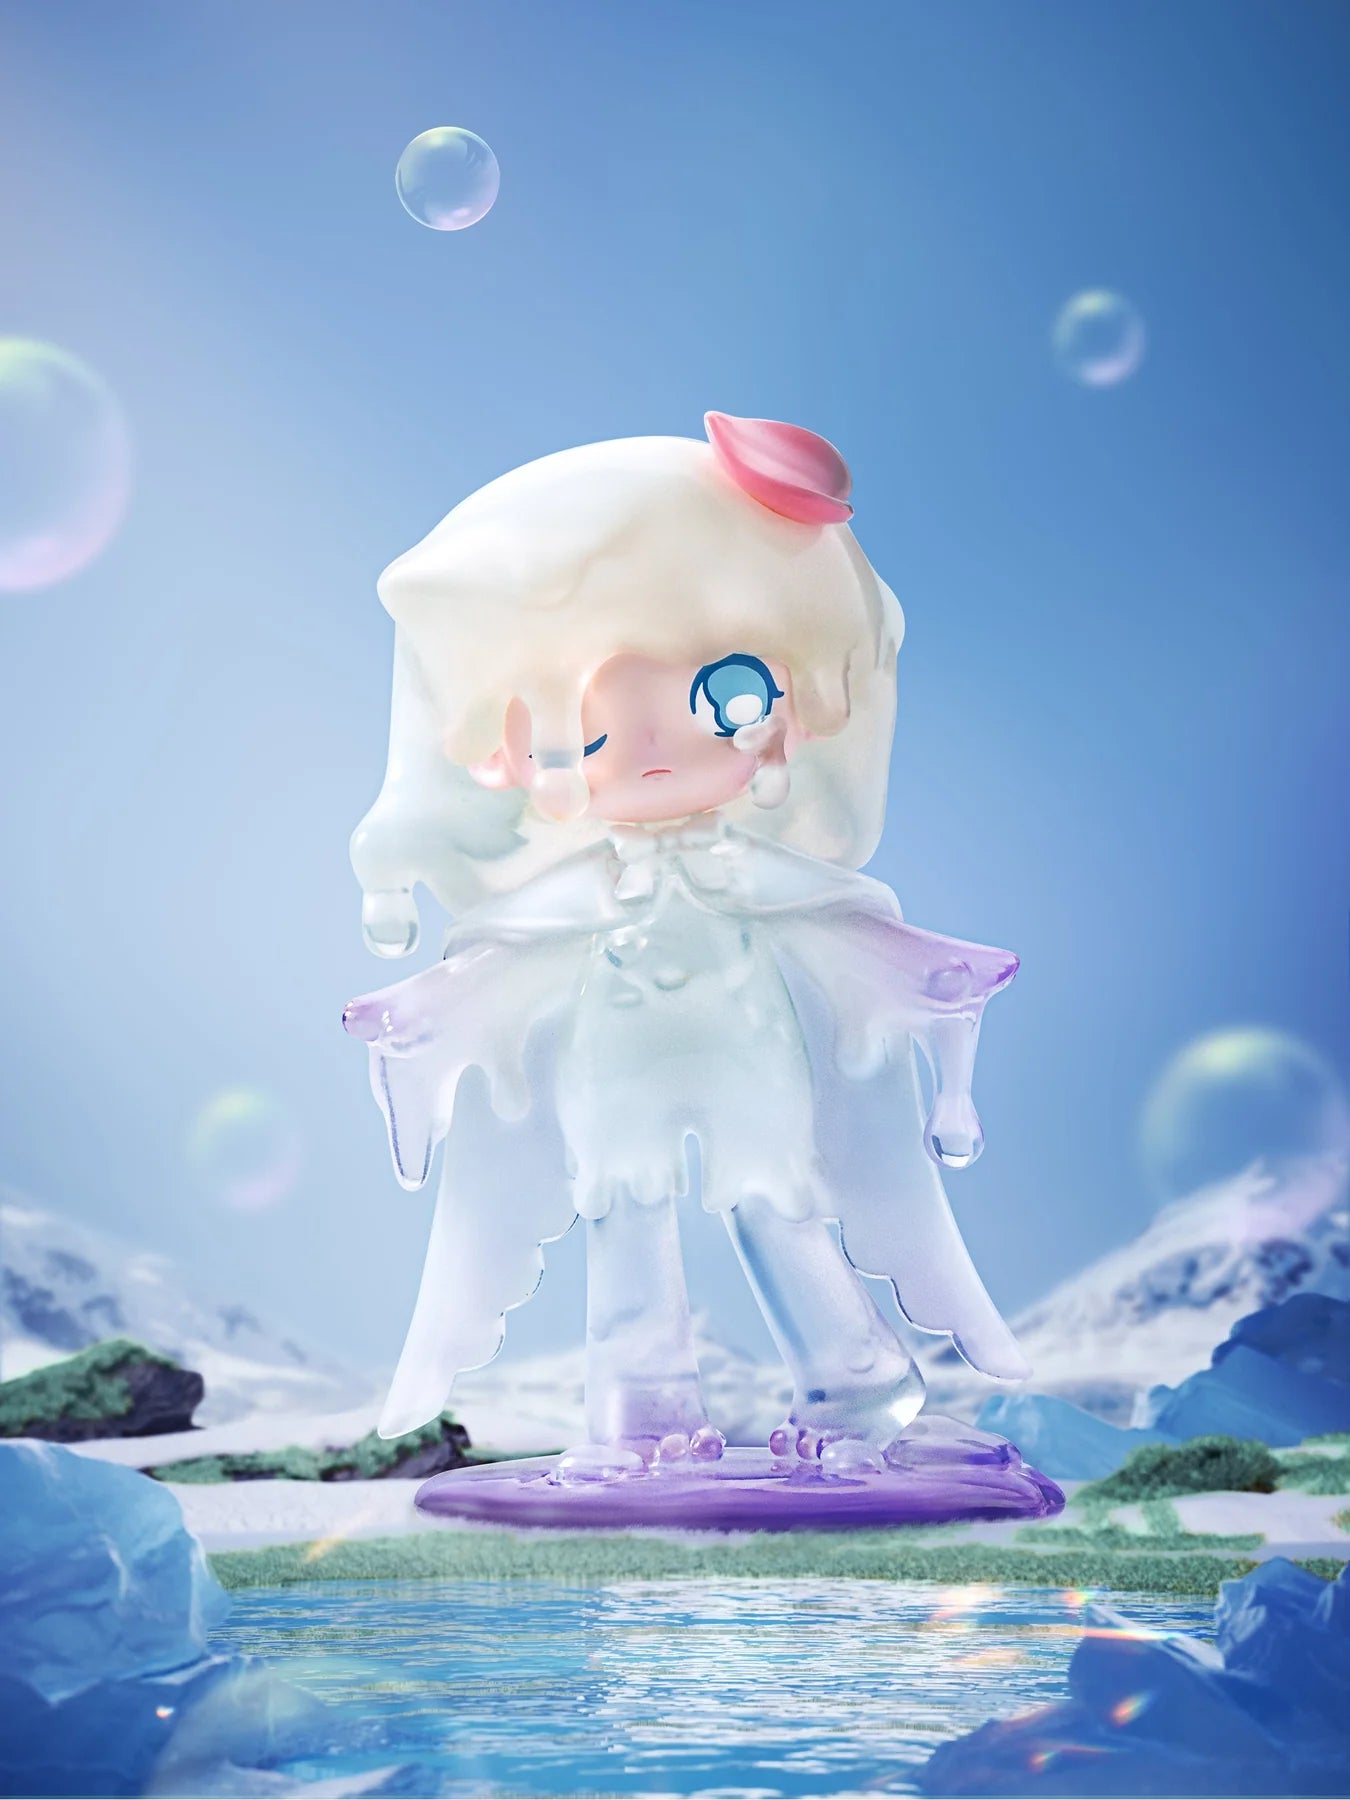 Toy figurine from AZURA Spring Fantasy Blind Box Series with ice, cartoon character, bubble, sky, water details.